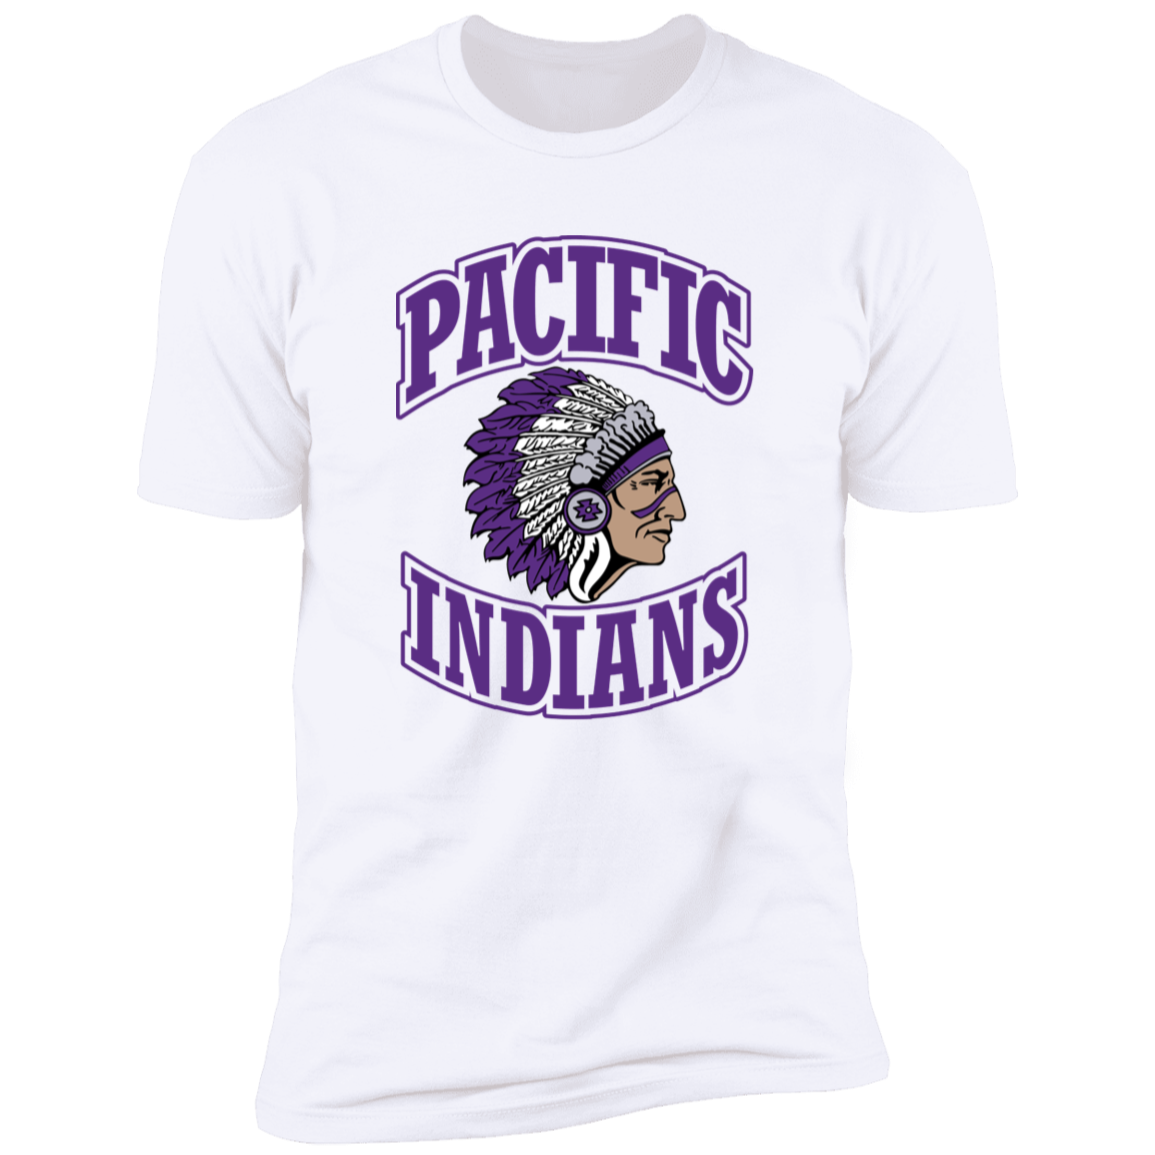 Pacific Indians Sports Club Design #1